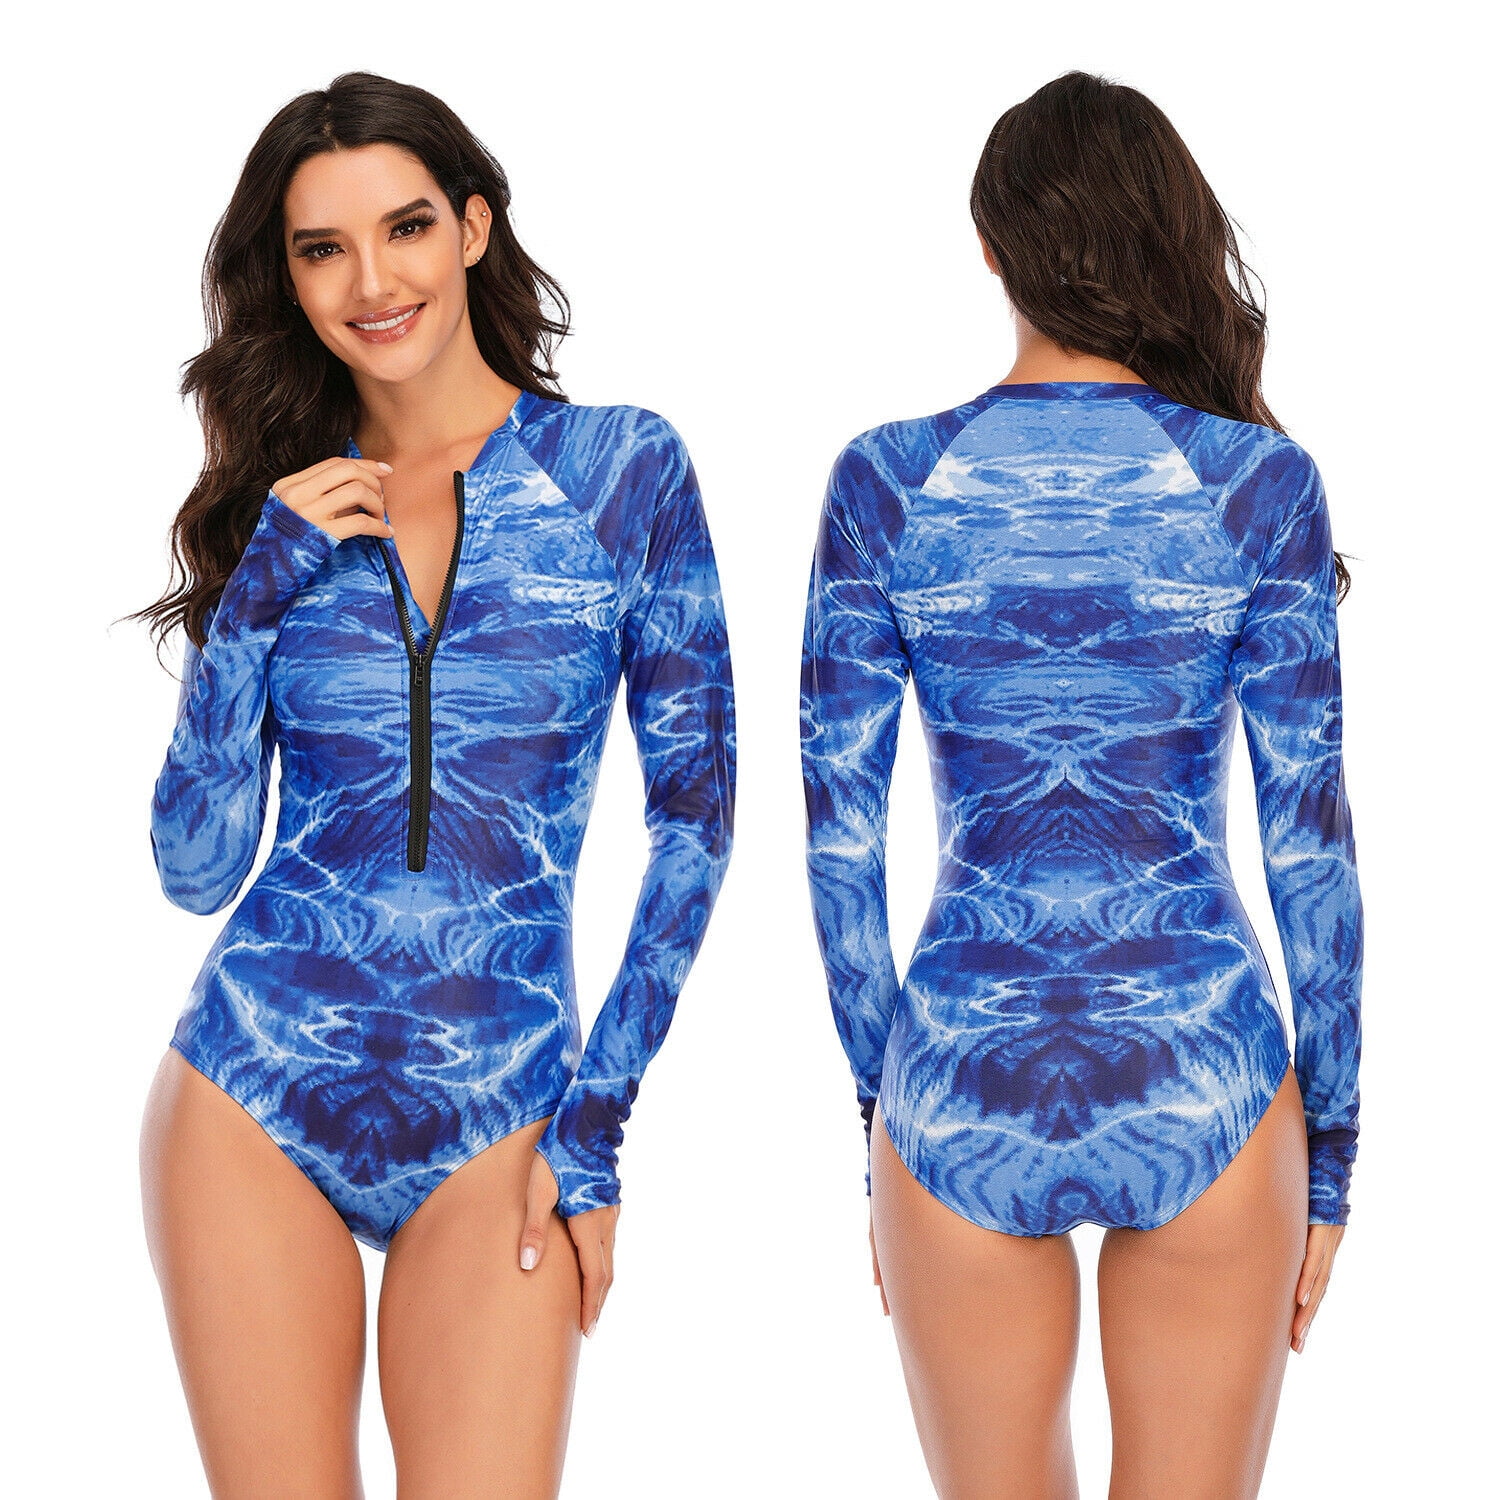 Sun Protection Printed Zipper Surfing Bathing Suit Solid Color Swimwear StyleV Womens Long Sleeve One Piece Swimsuit Rash Guard UV UPF 50